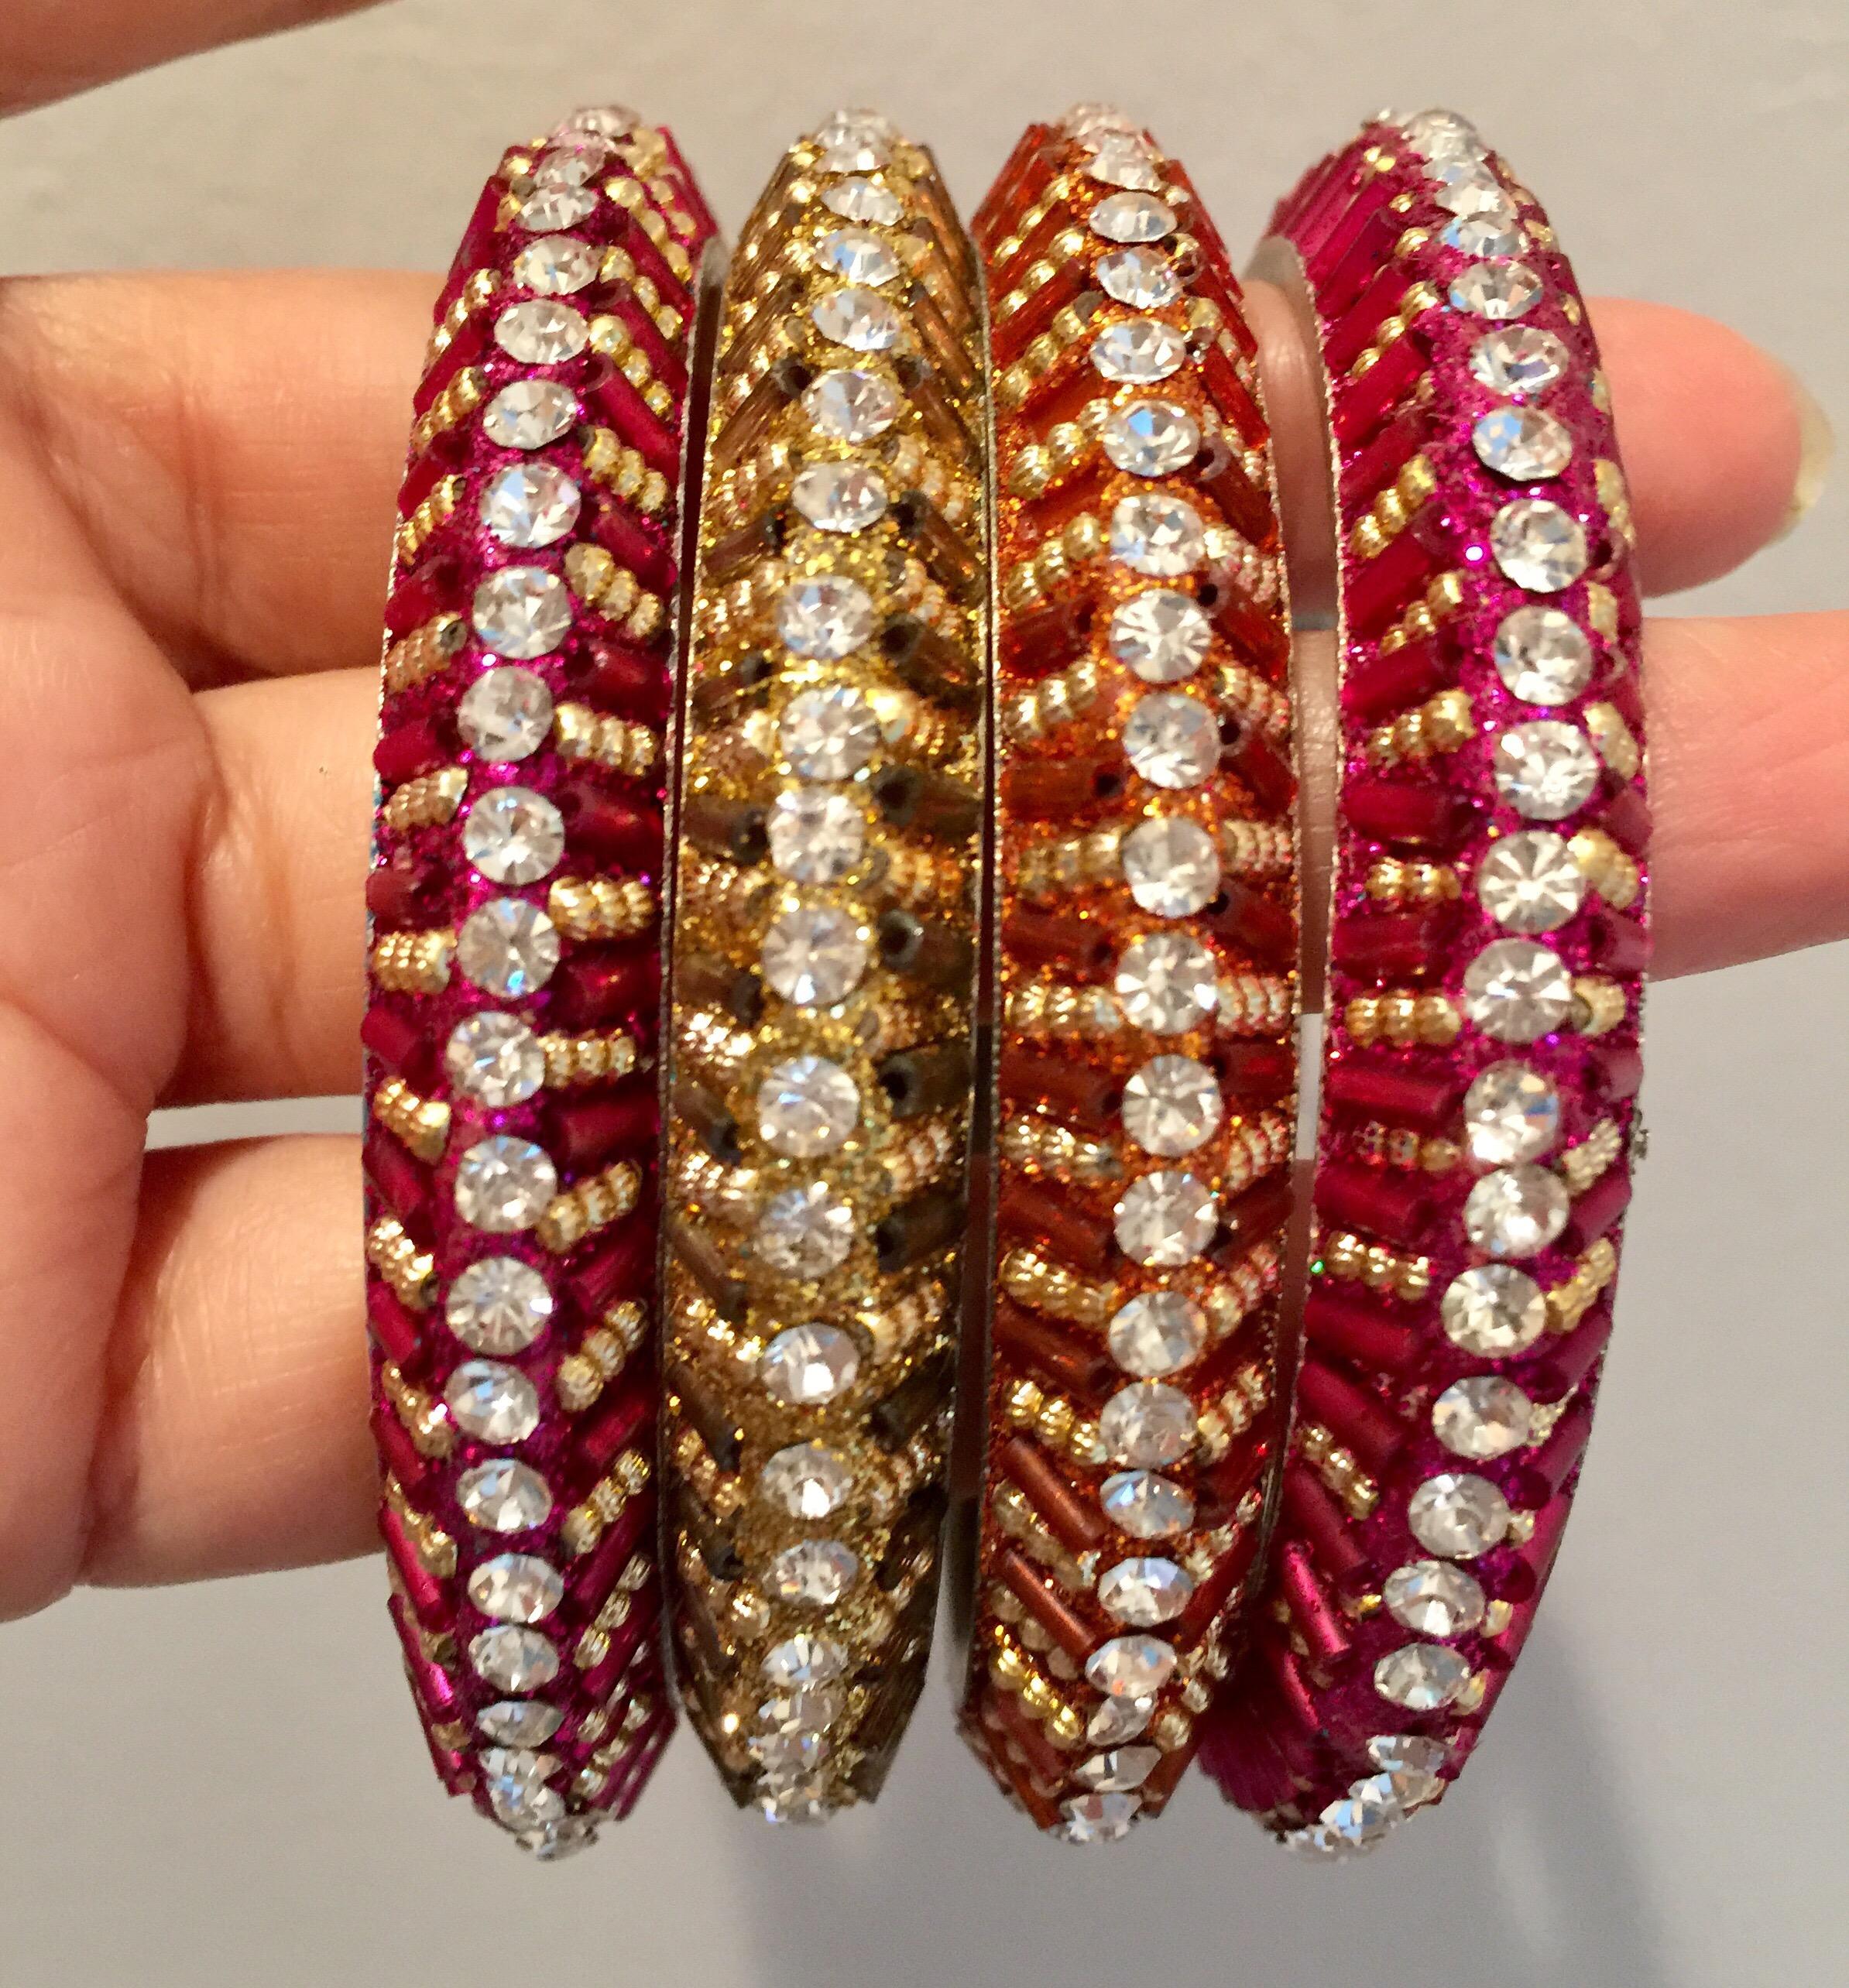 Beautiful bright colored handmade rhinestone bangles will brighten up any outfit.  
Can be purchased in set of 4 or 2 bangles.
Inner diameter 65.00 mm (2.56 in), inner circumference 204.2 mm (7.04 in)

FOLLOW  MEGHNA JEWELS storefront to view the